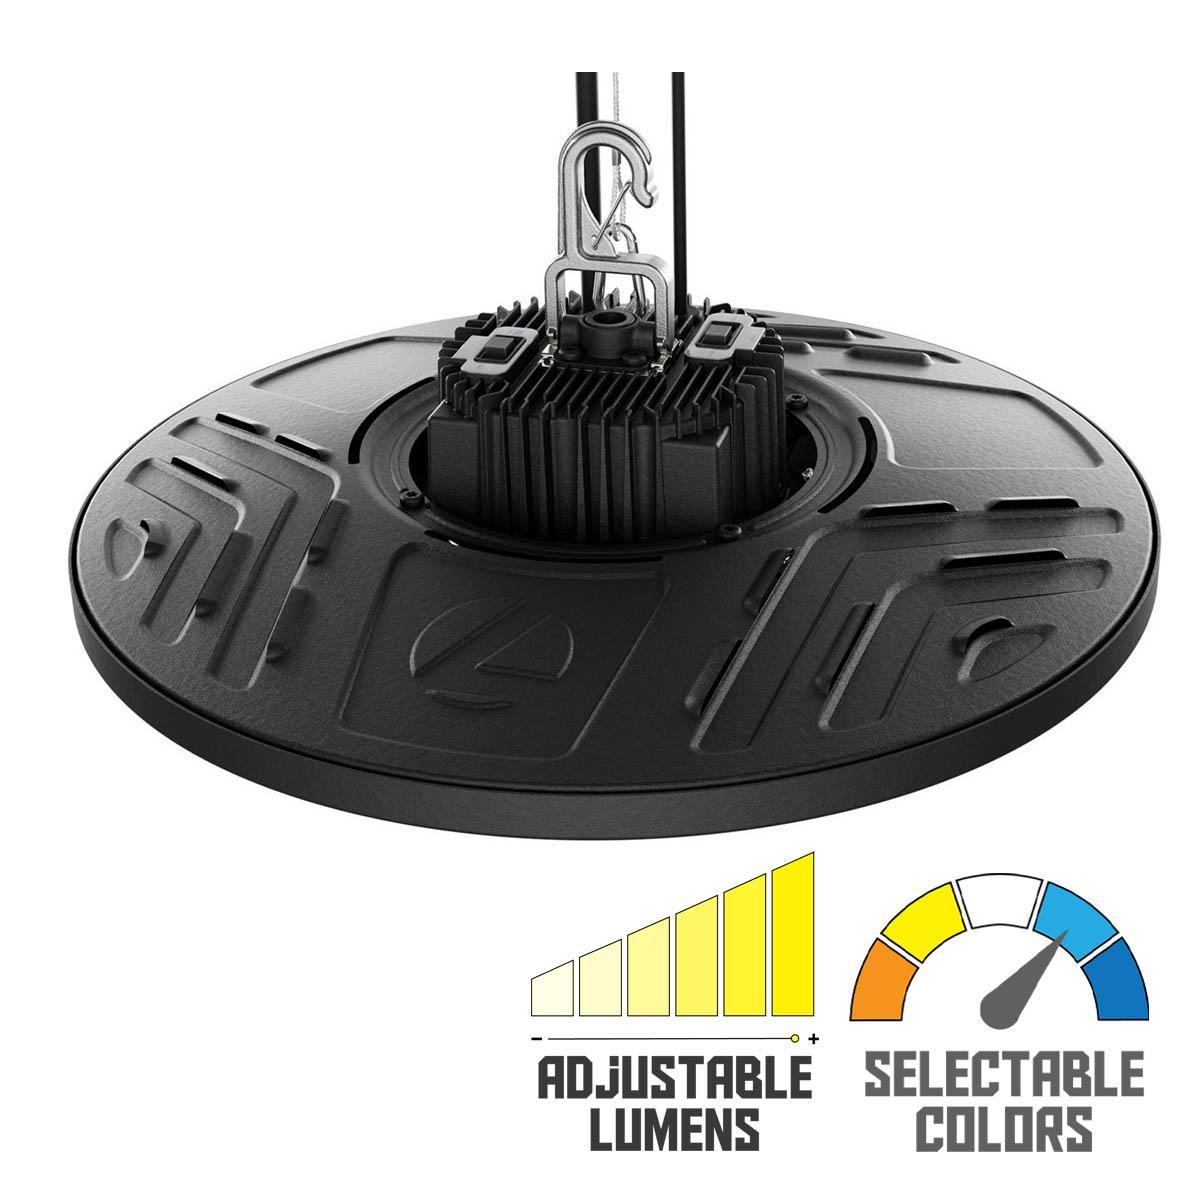 Compact Pro Industrial LED Round High Bay, Selectable 27000 Lumens, 4000K/5000K CCT, 120-347V, Black - Bees Lighting